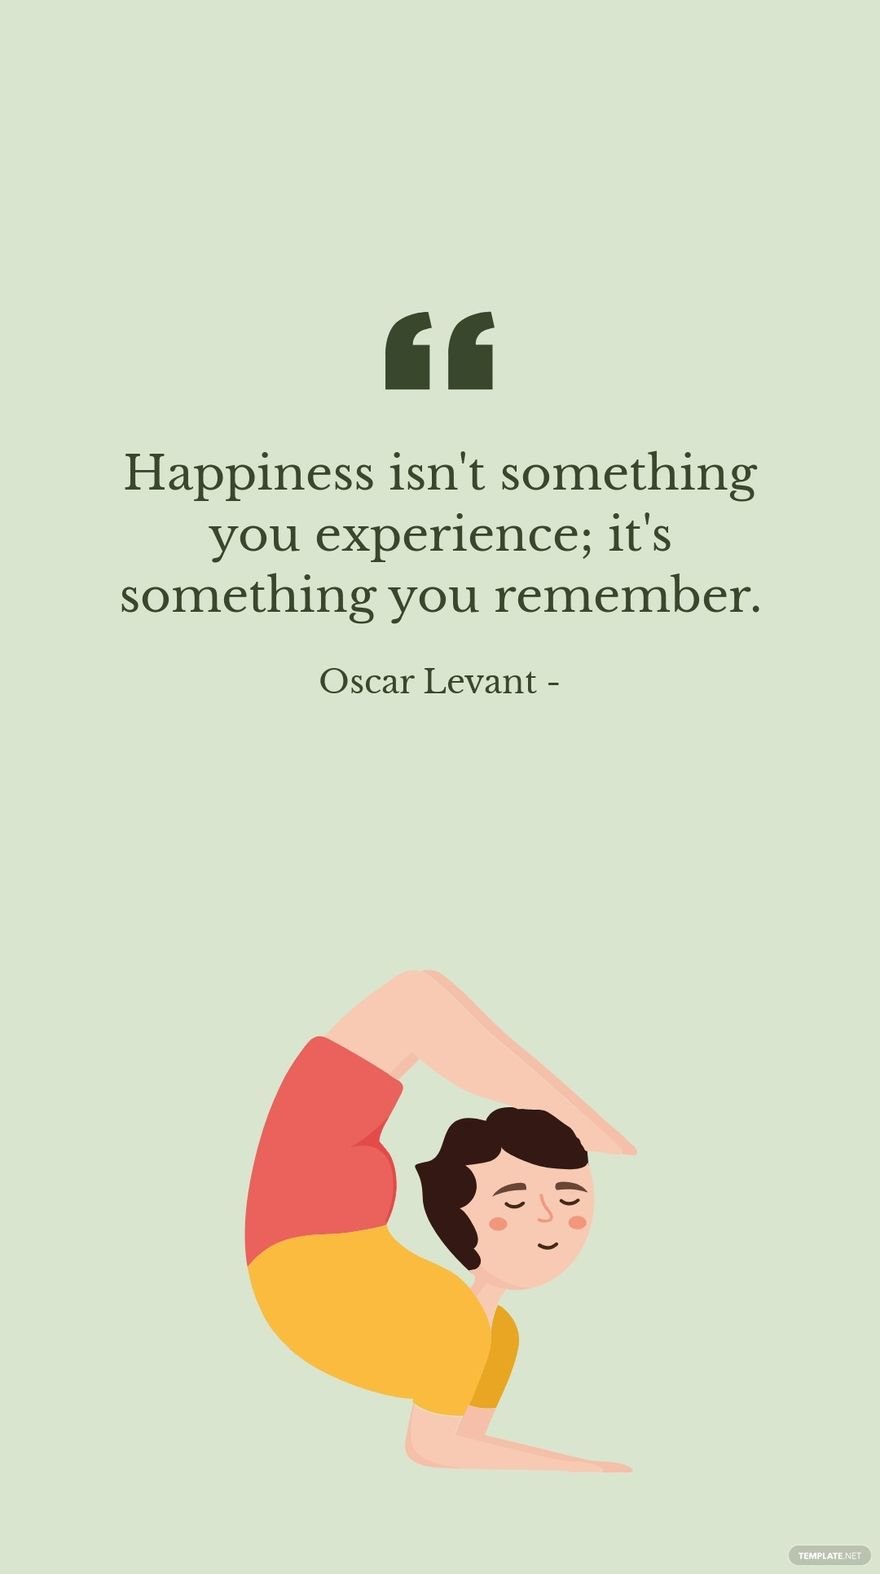 Oscar Levant - Happiness isn't something you experience; it's something you remember.